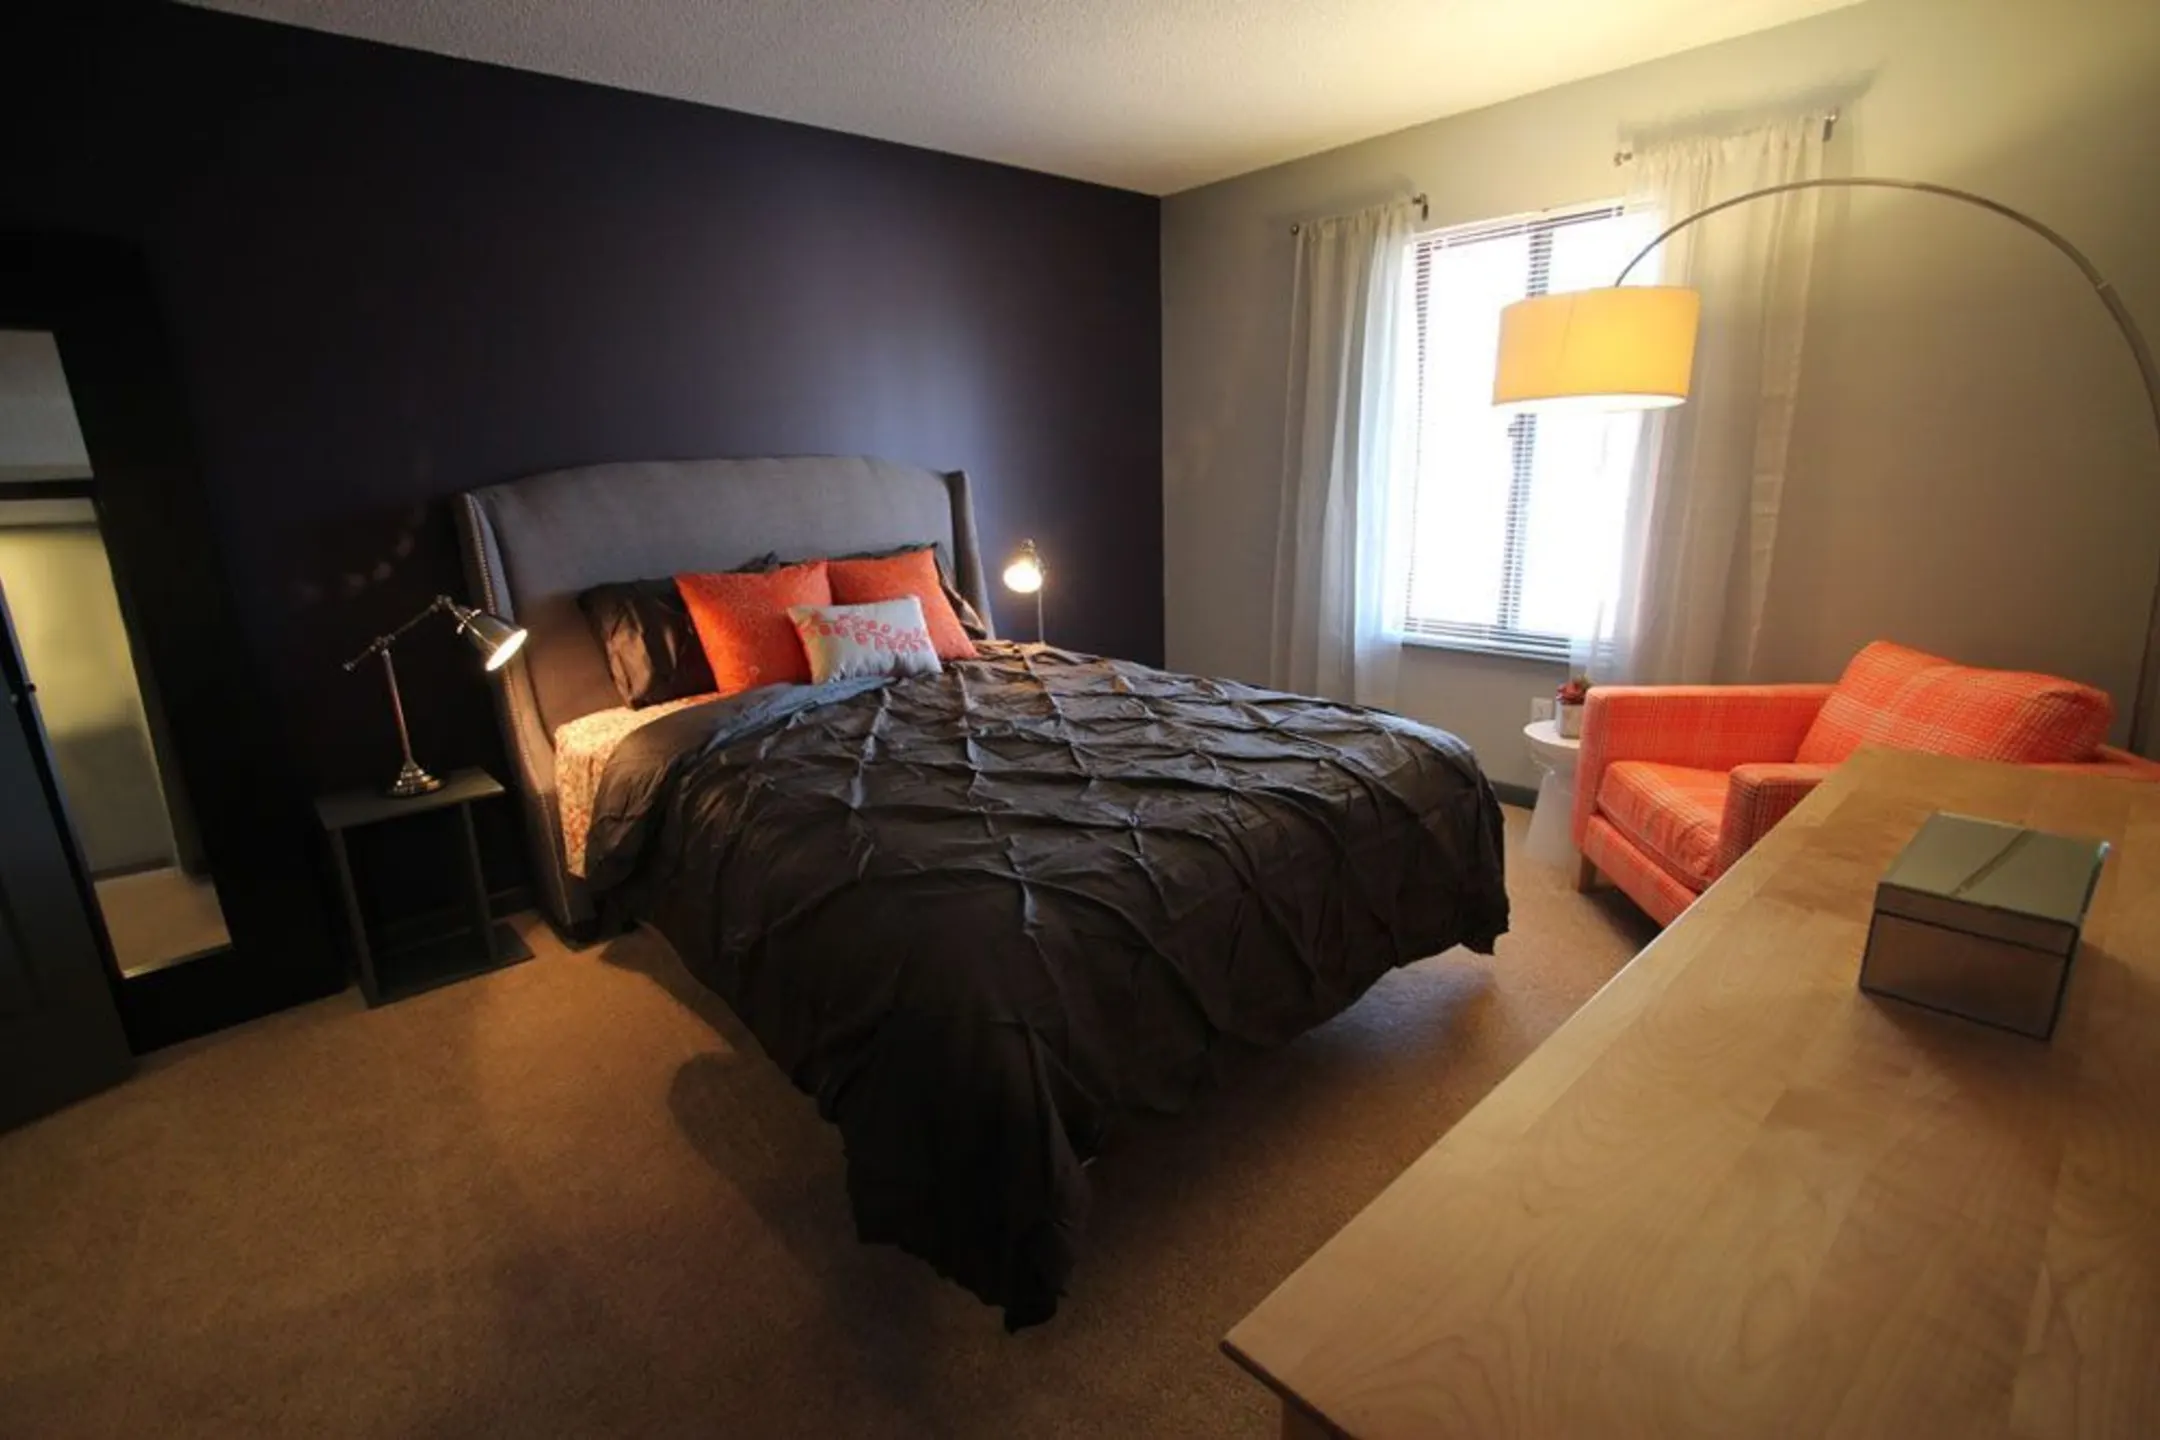 Bedroom - Landmark Apartments & Townhomes - Indianapolis, IN